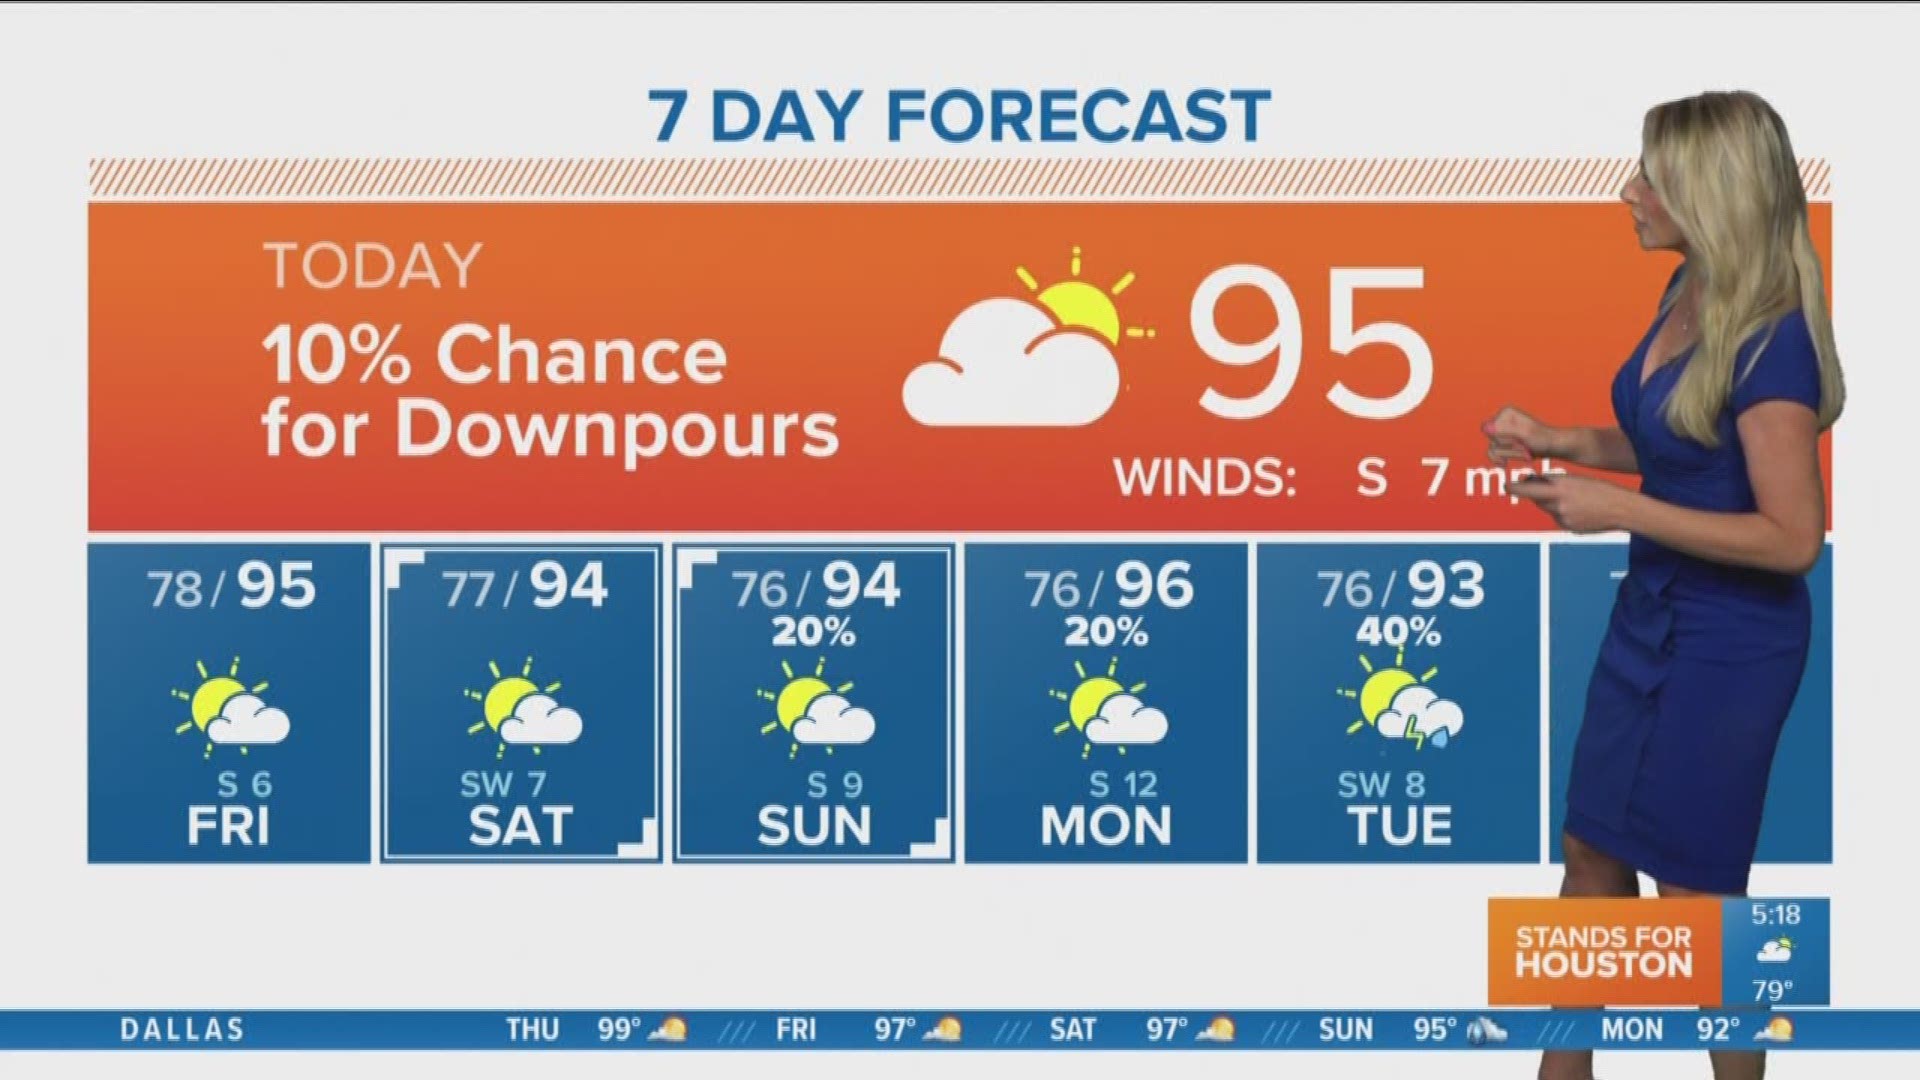 KHOU 11 Meteorologist Chita Craft says Thursday is going to be hot and steamy with a small chance for downpours.